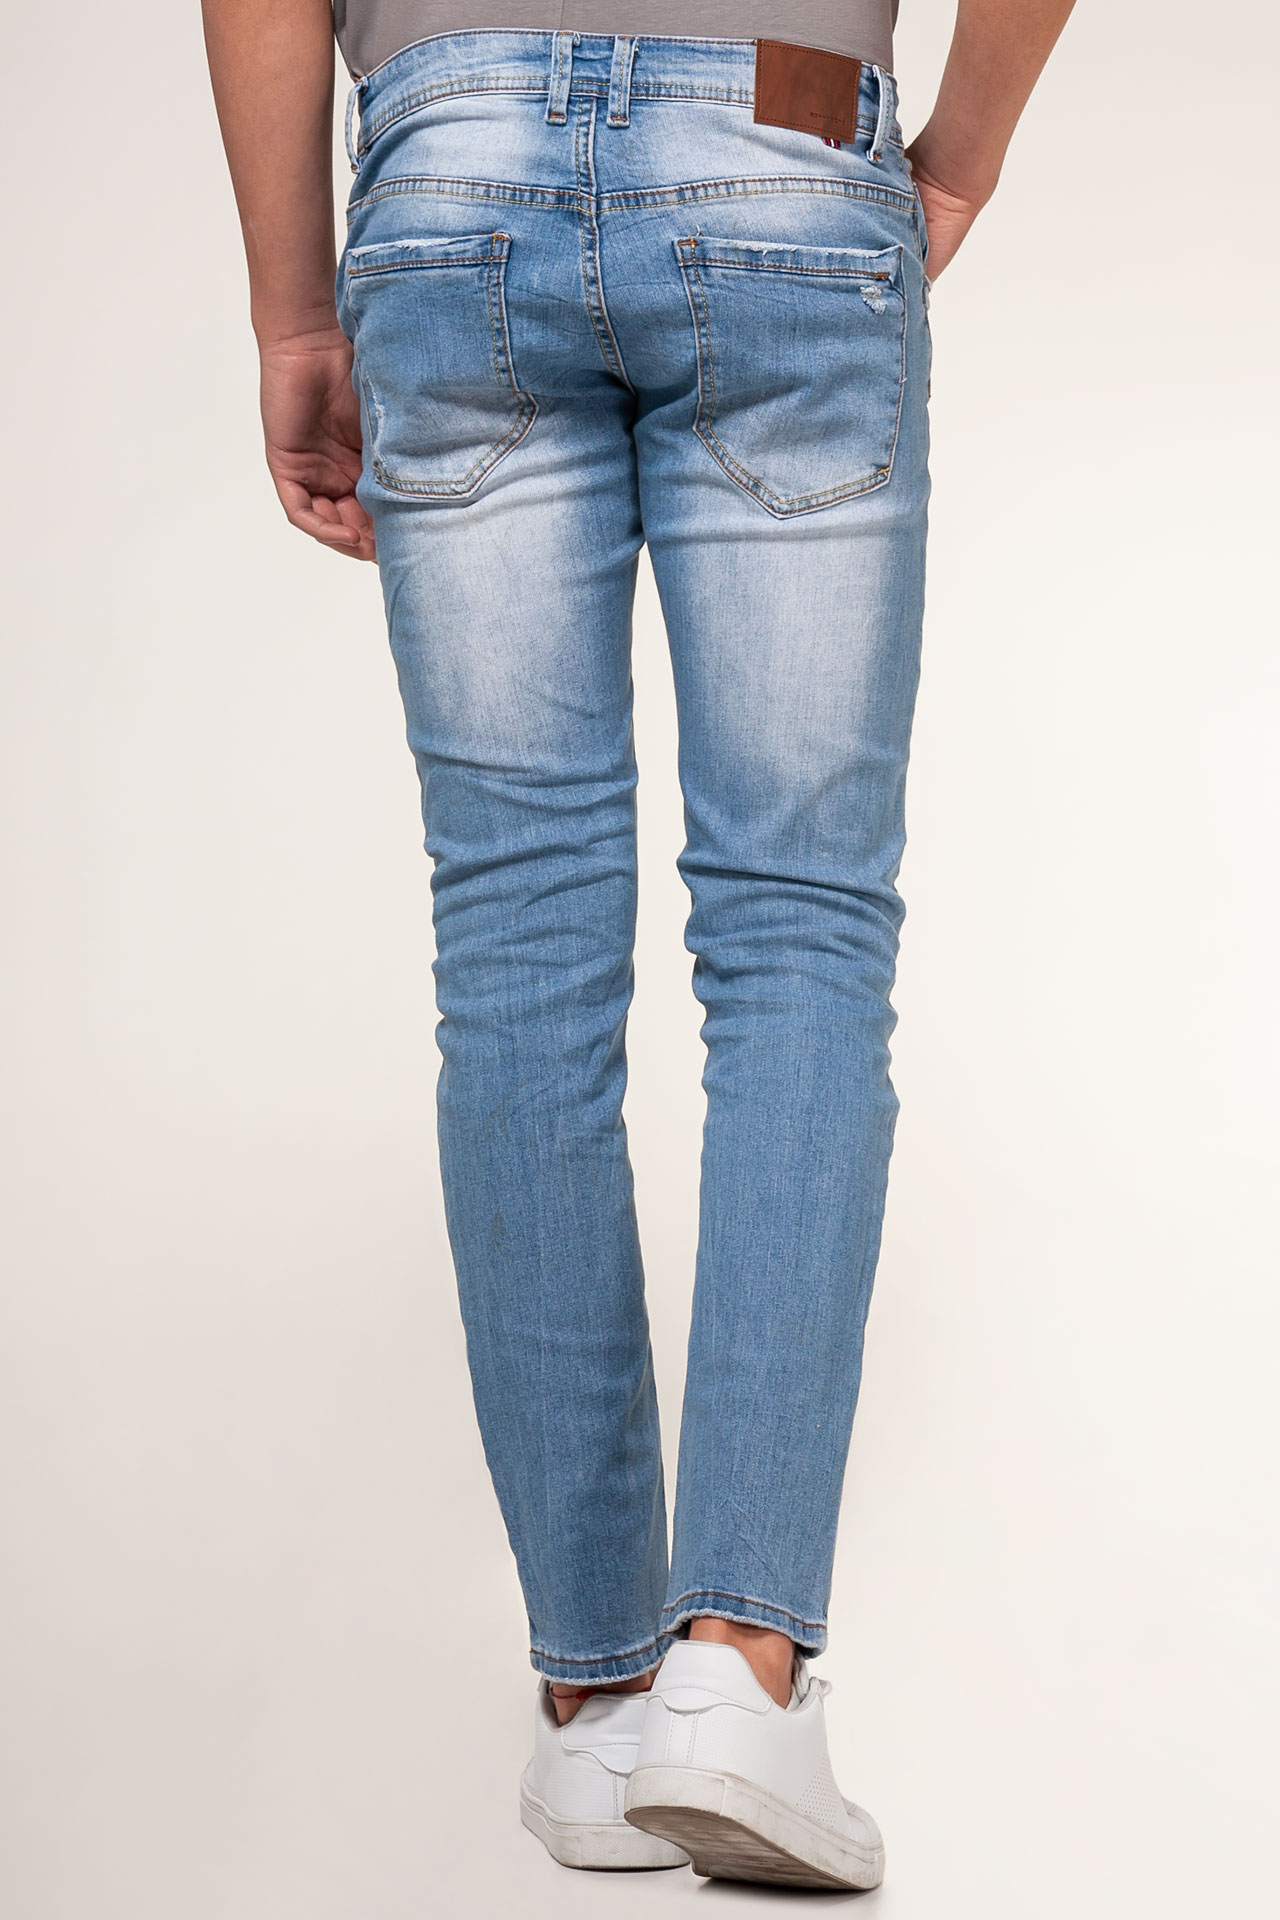 JEANS 5 TASCHE VEST. SKINNY. INDACO